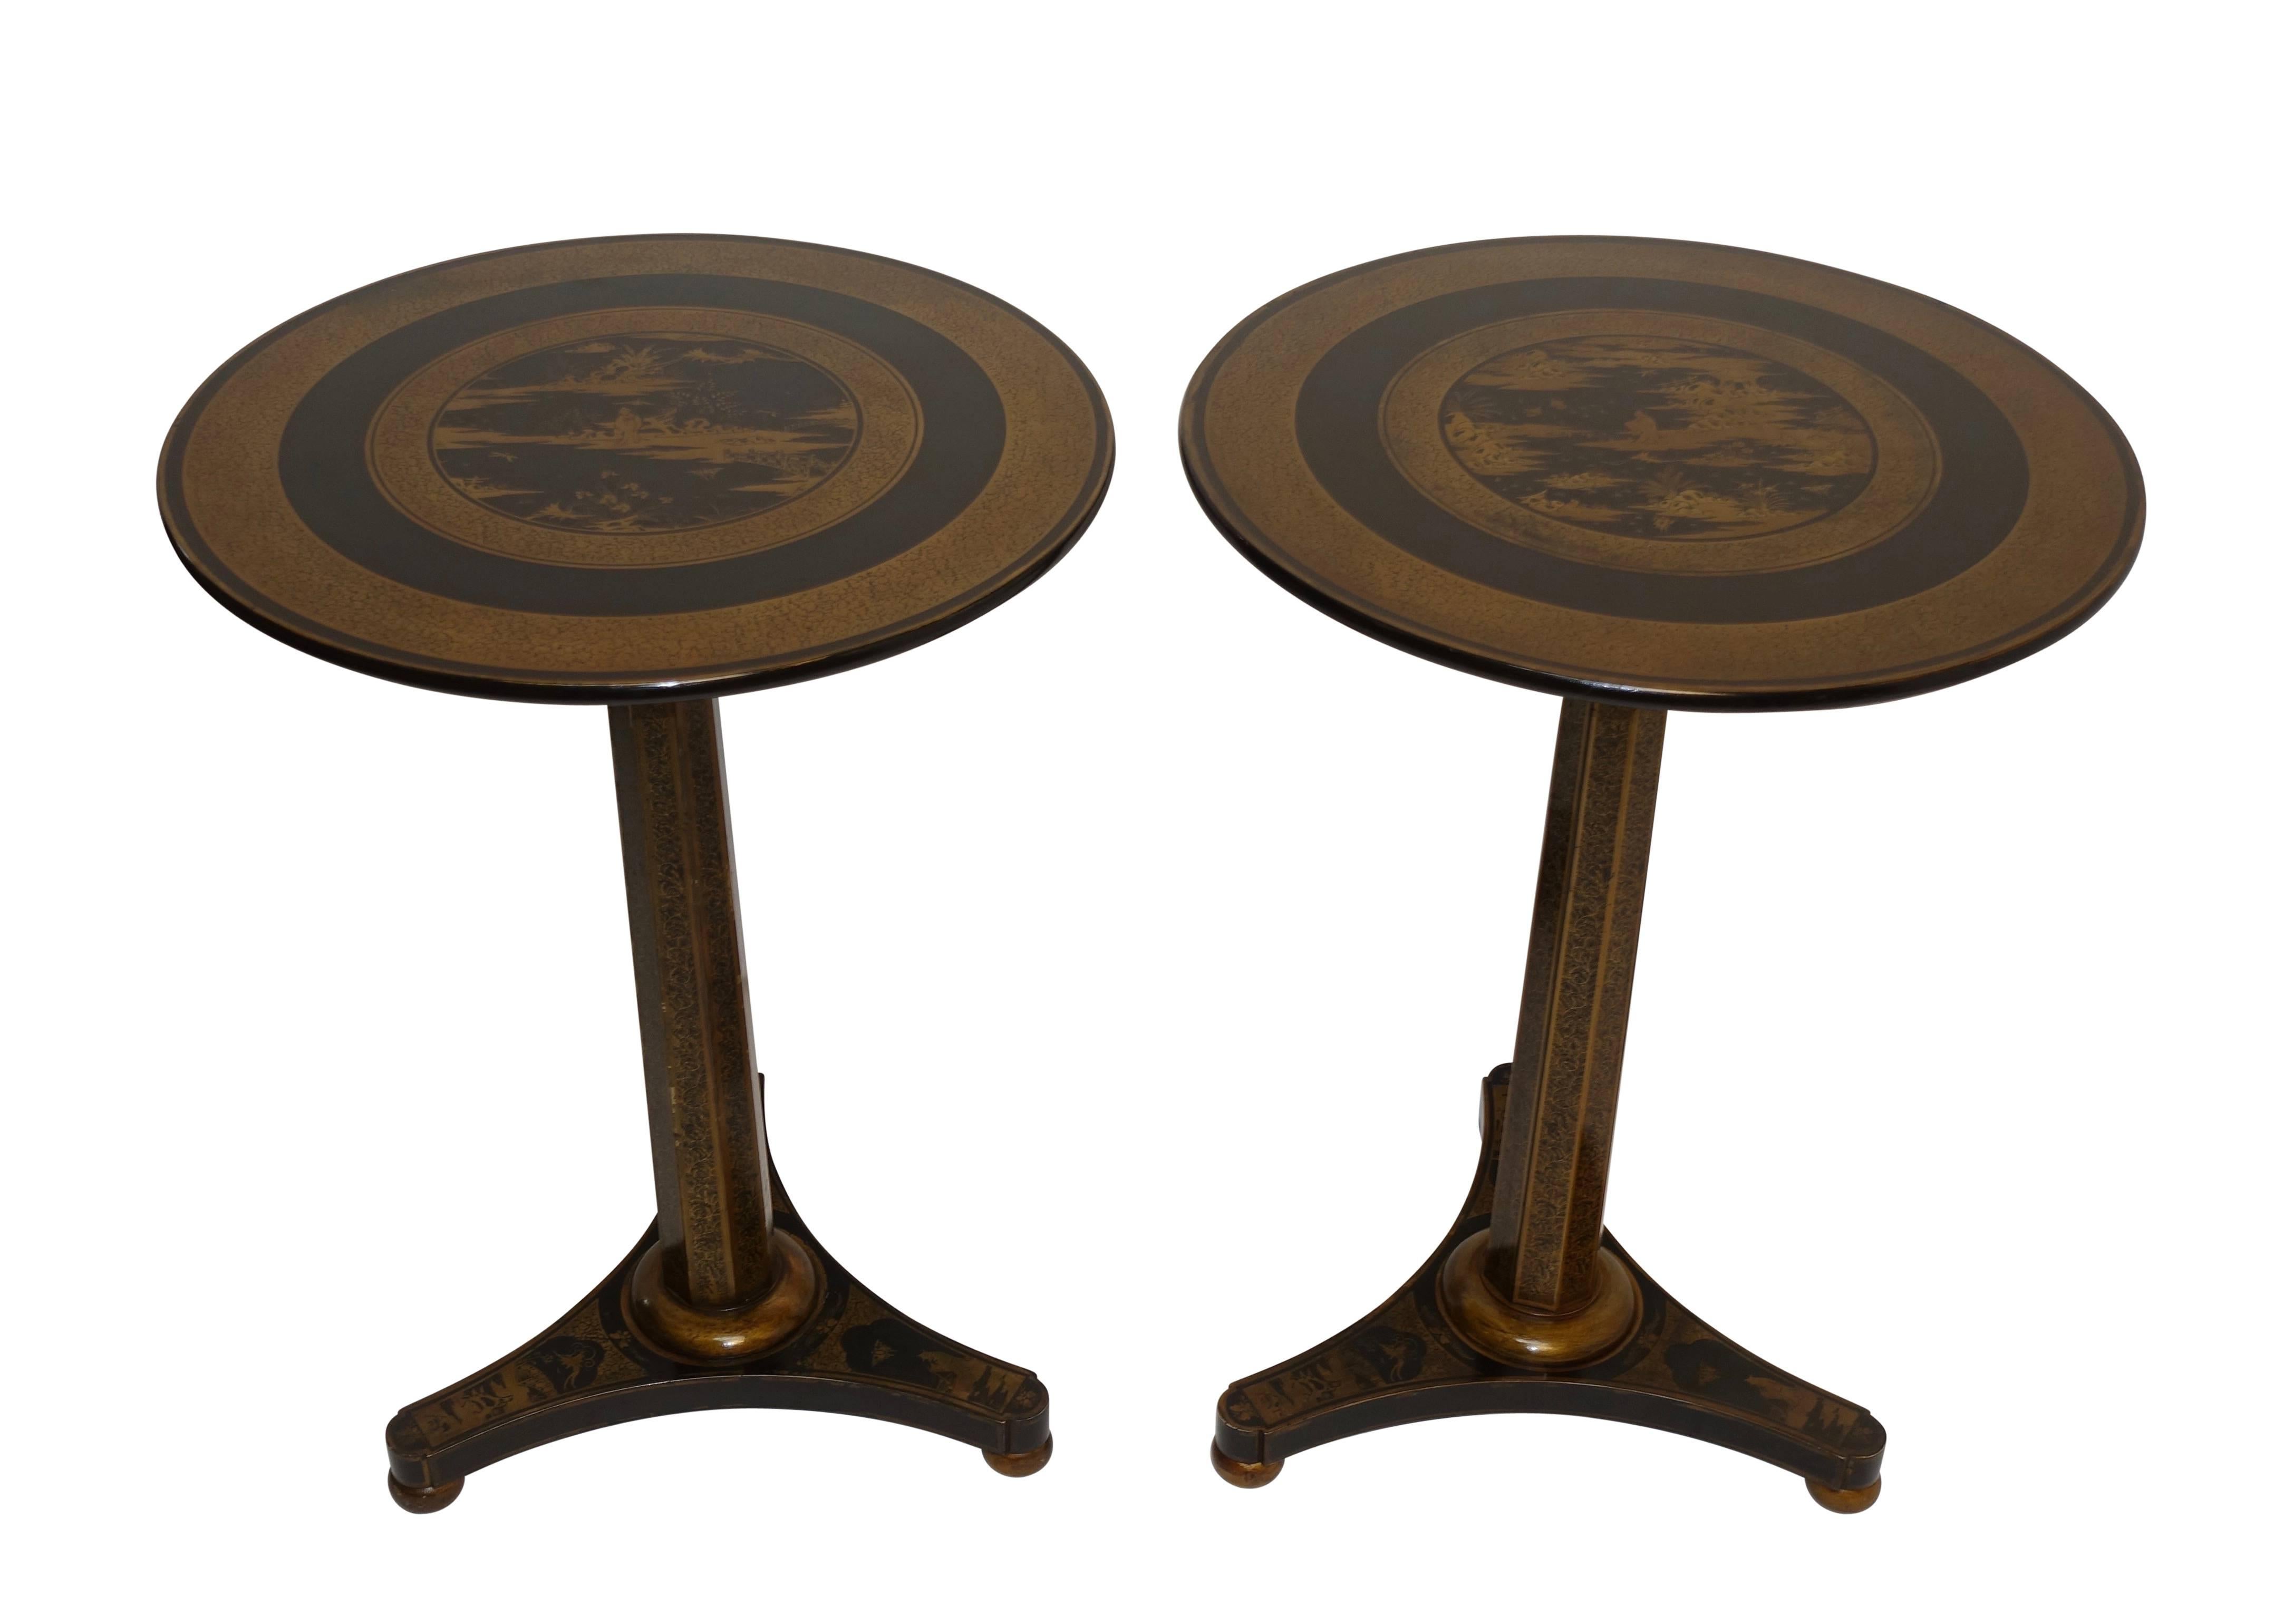 Regency Black Lacquer Side Tables with Chinoiserie Decoration, circa 1840, Pair